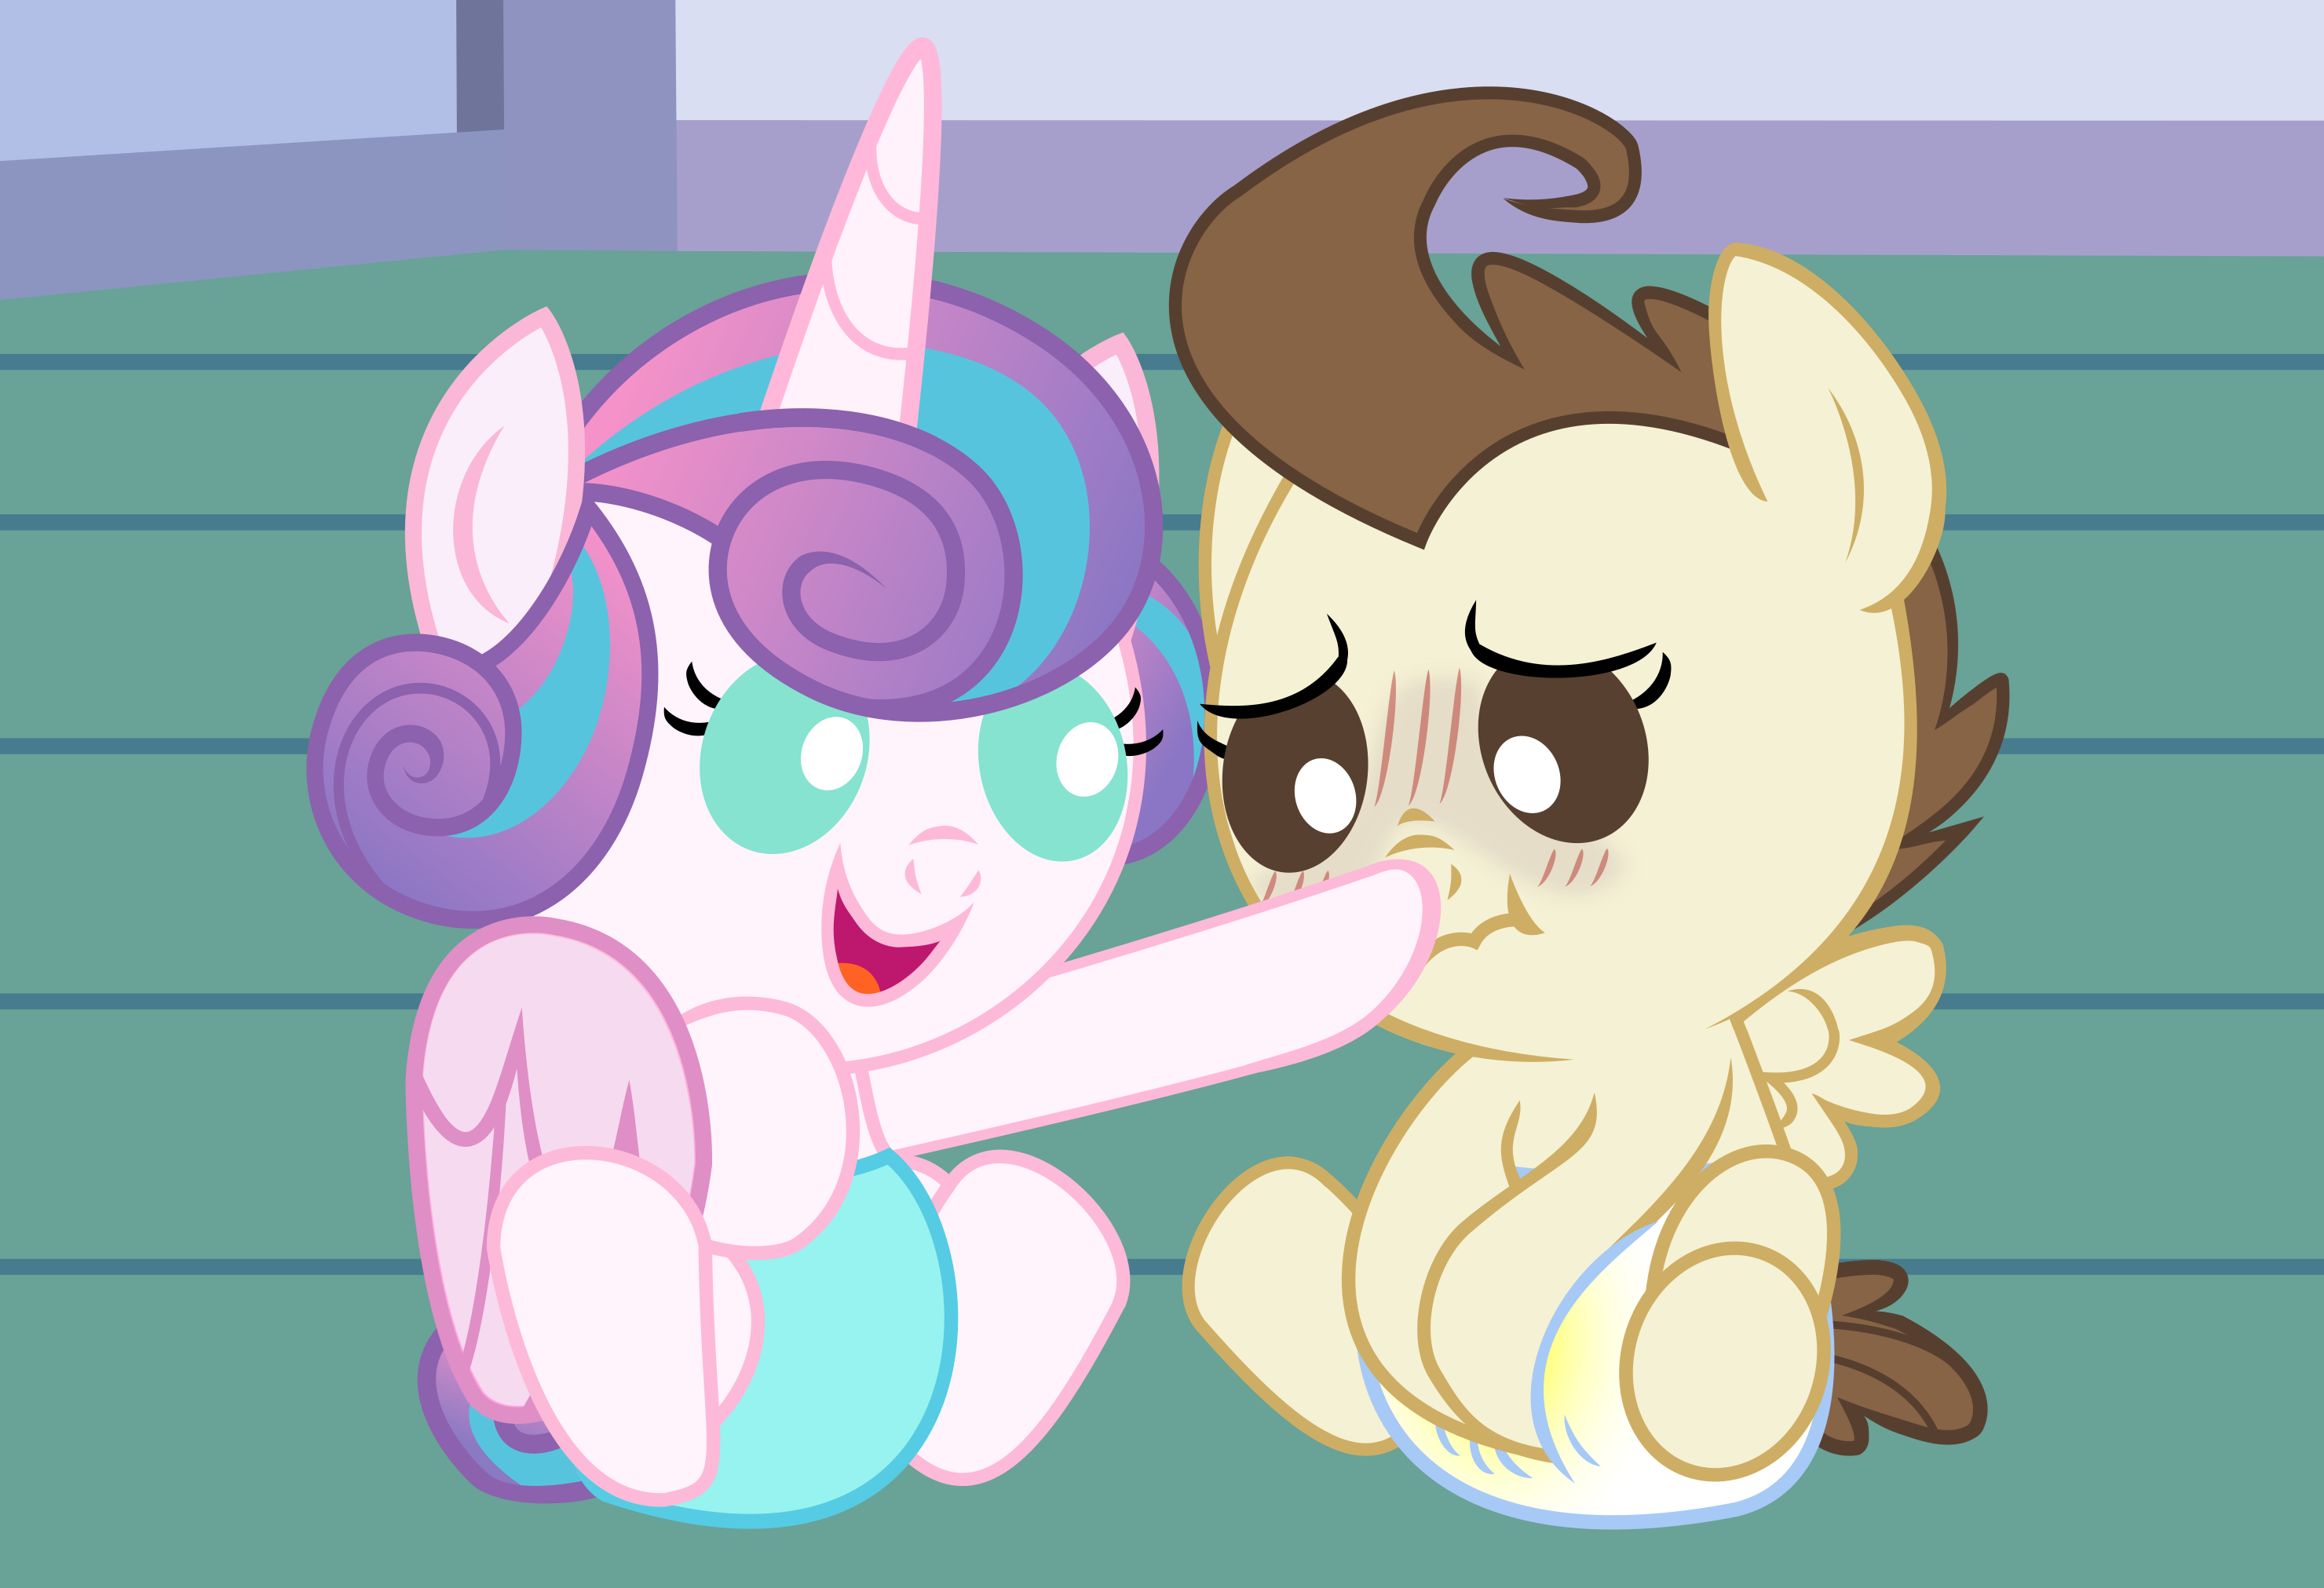 1580528__questionable_artist-colon-babyshy_pound+cake_princess+flurry+heart_alternate+design_babies_baby_baby+pony_blushing_boop_cute_diaper_embarrasse.png